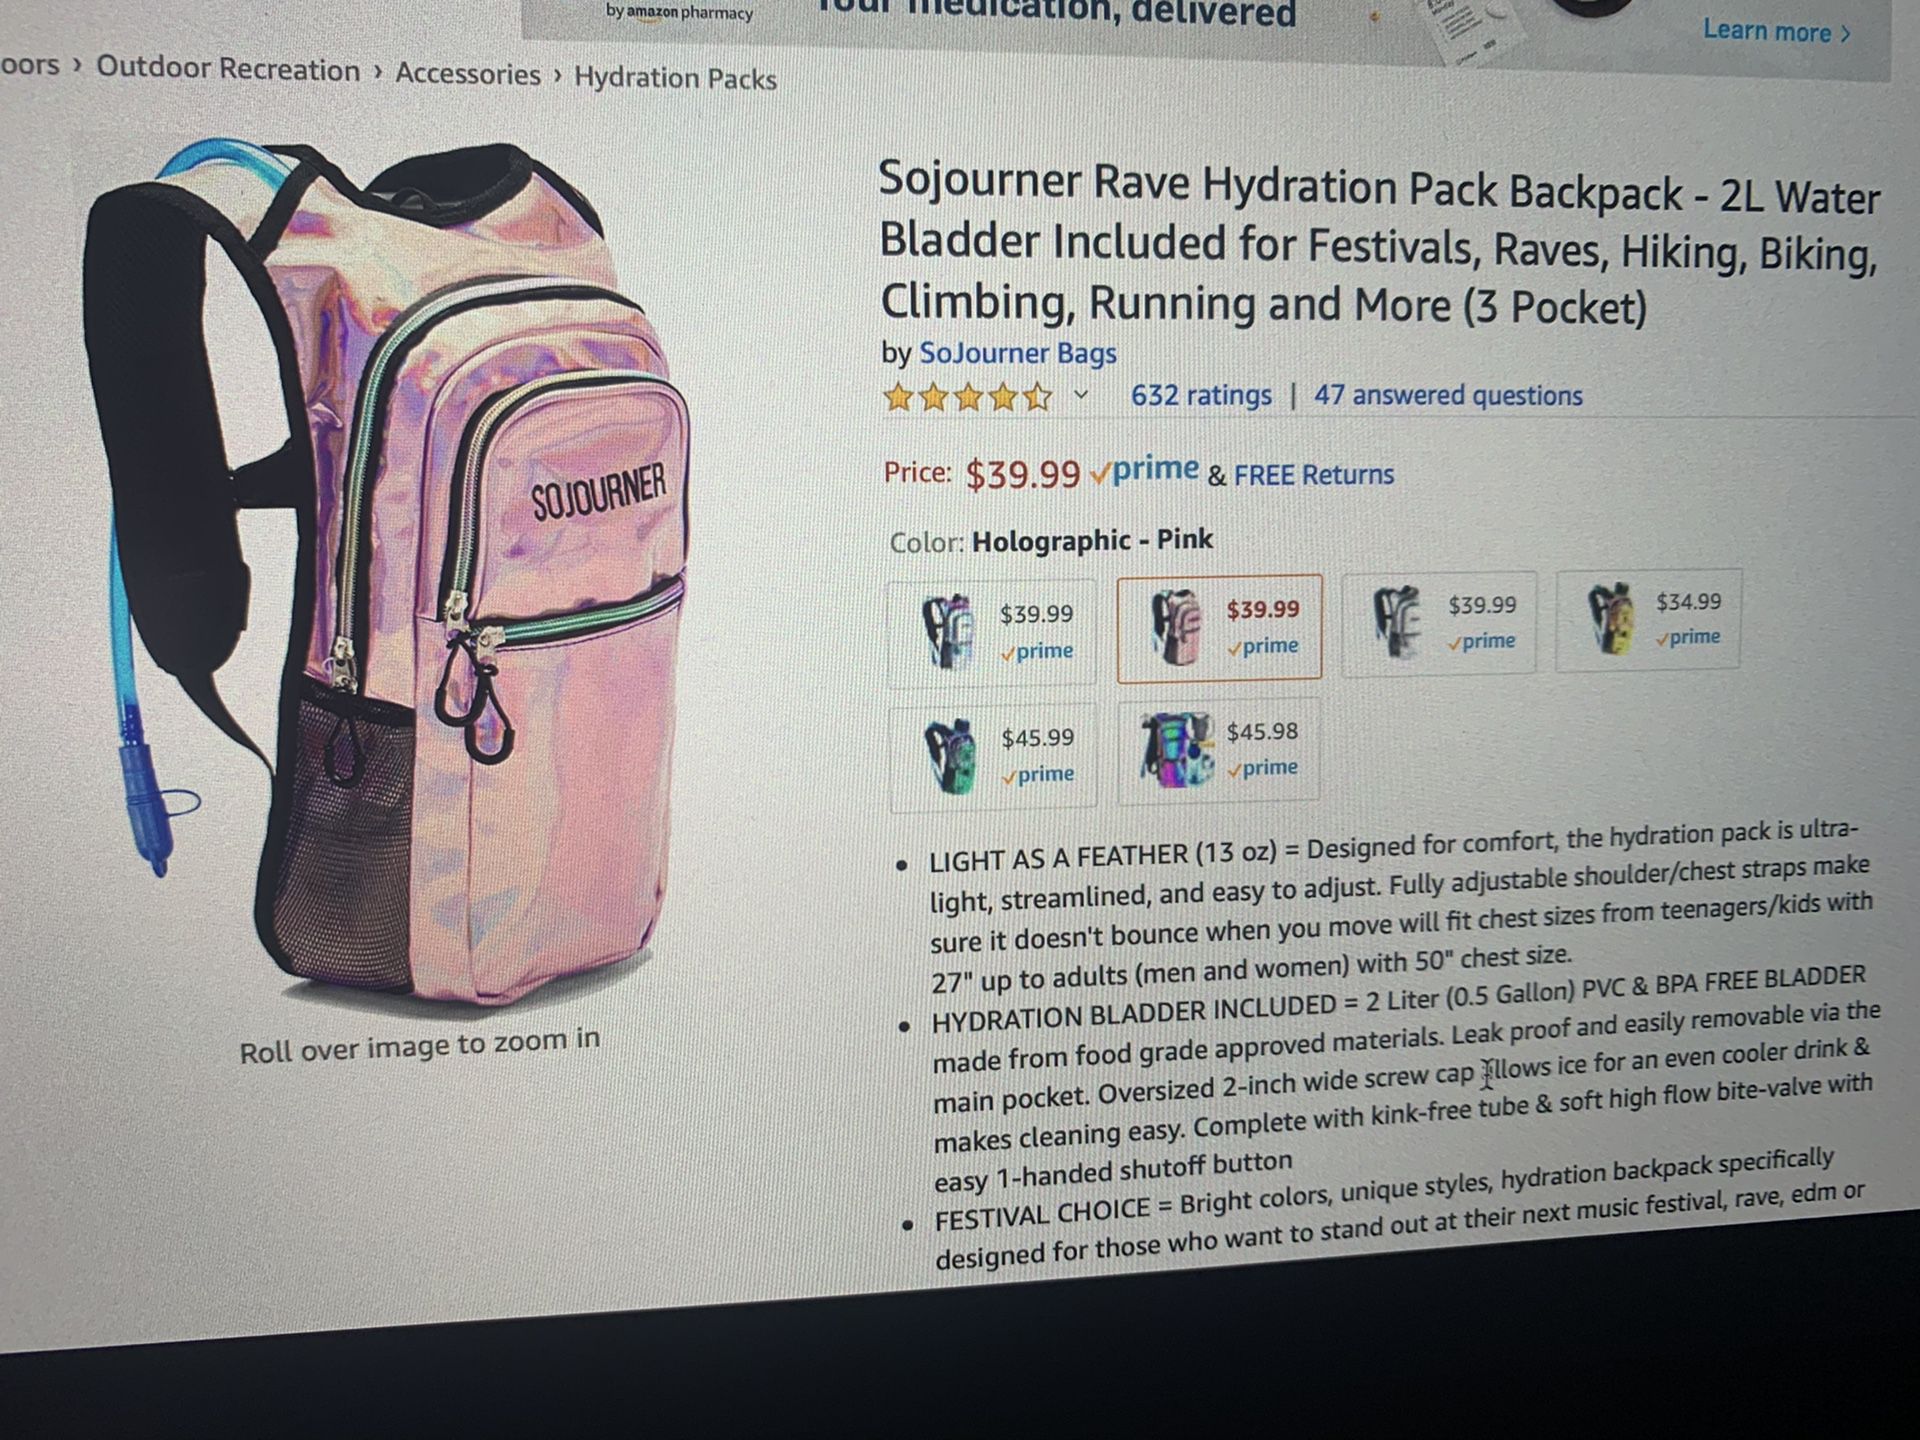 Hydration pack backpack *NEW*